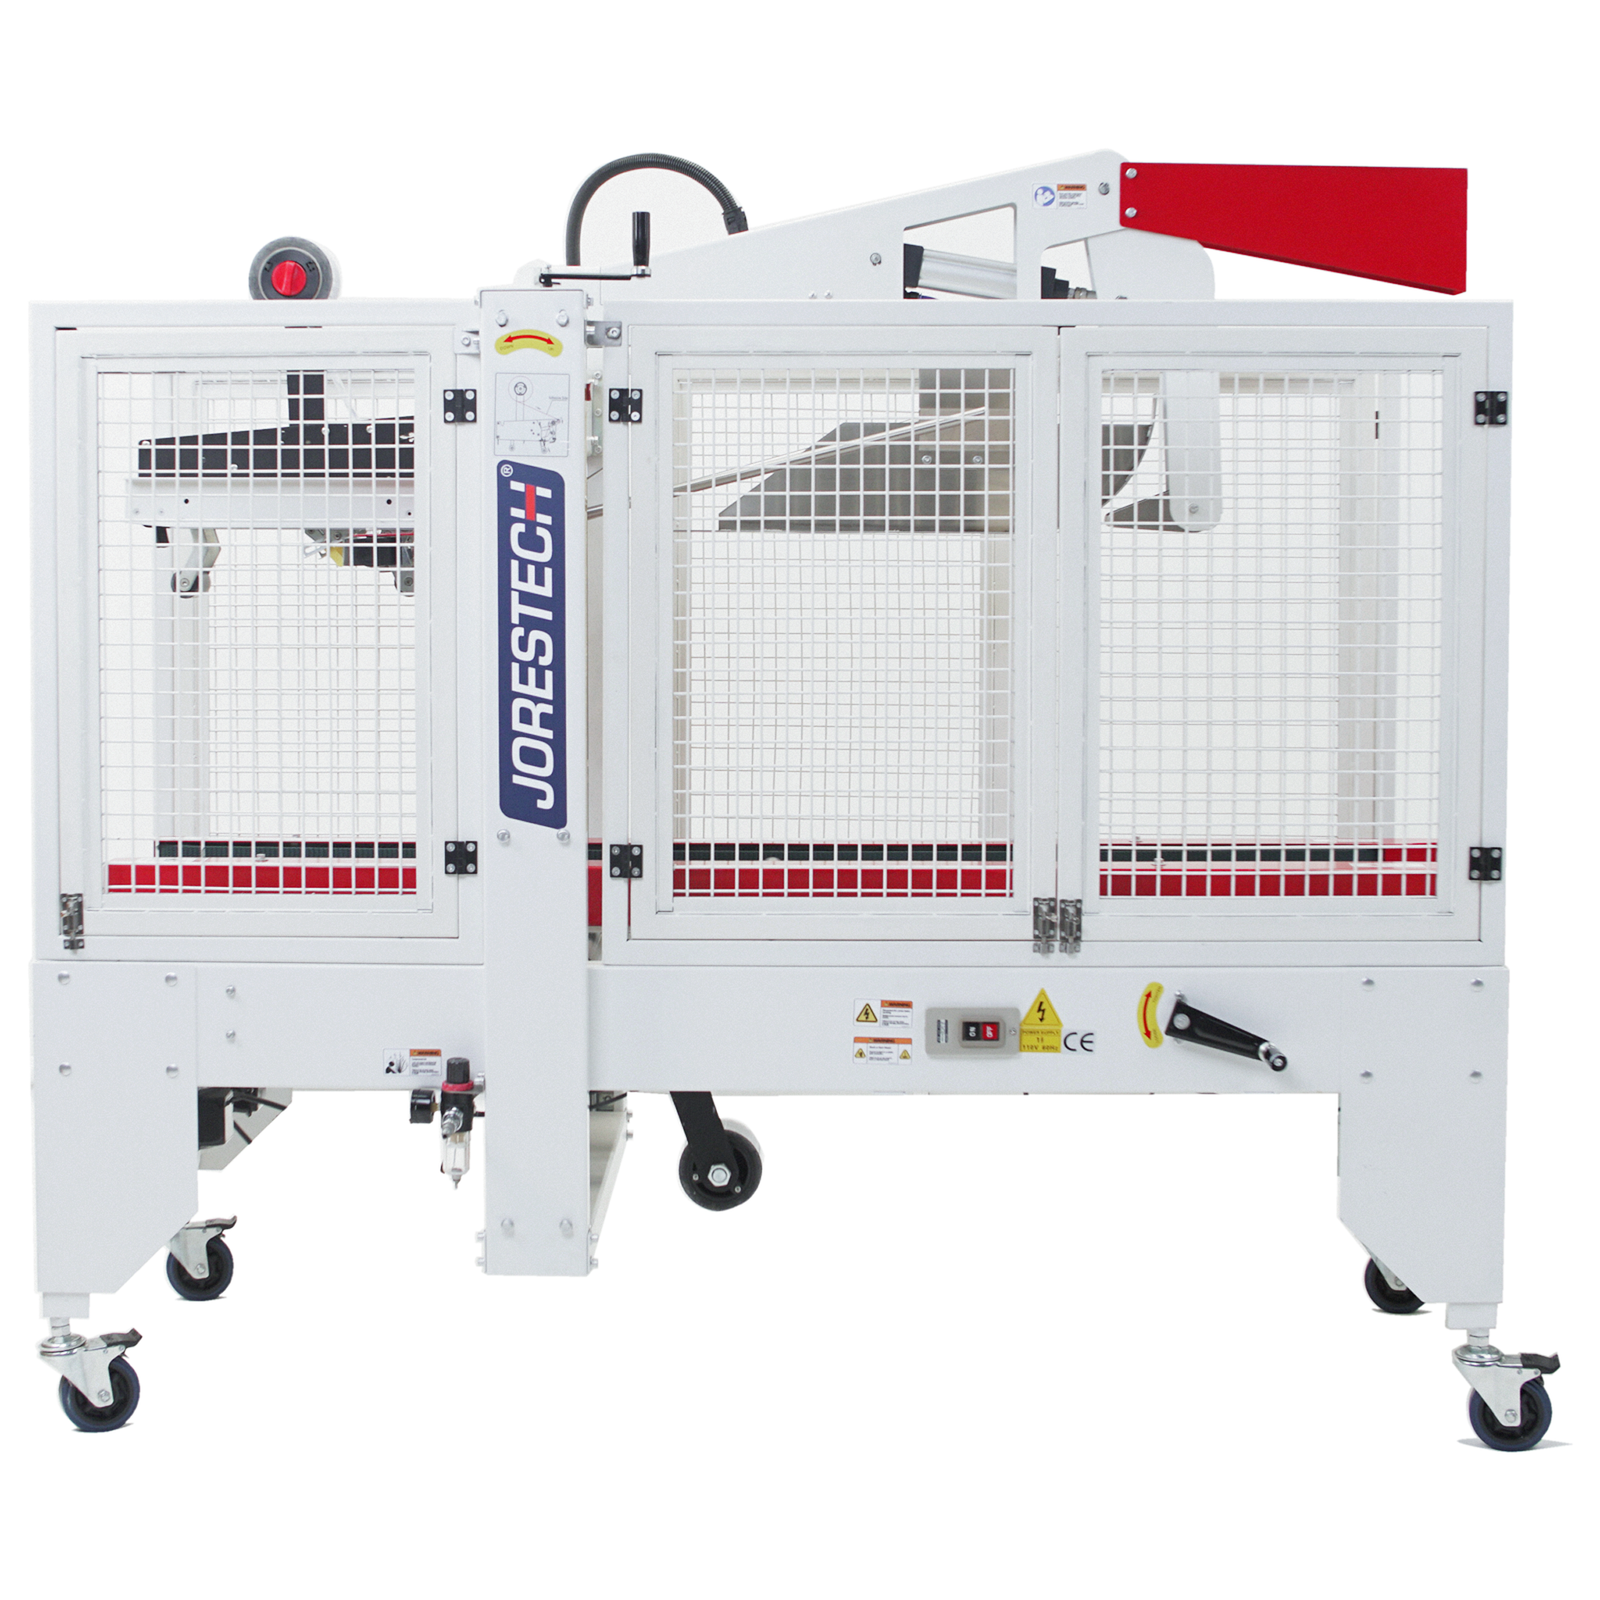 Case sealer machine with red side traction bars and wheels